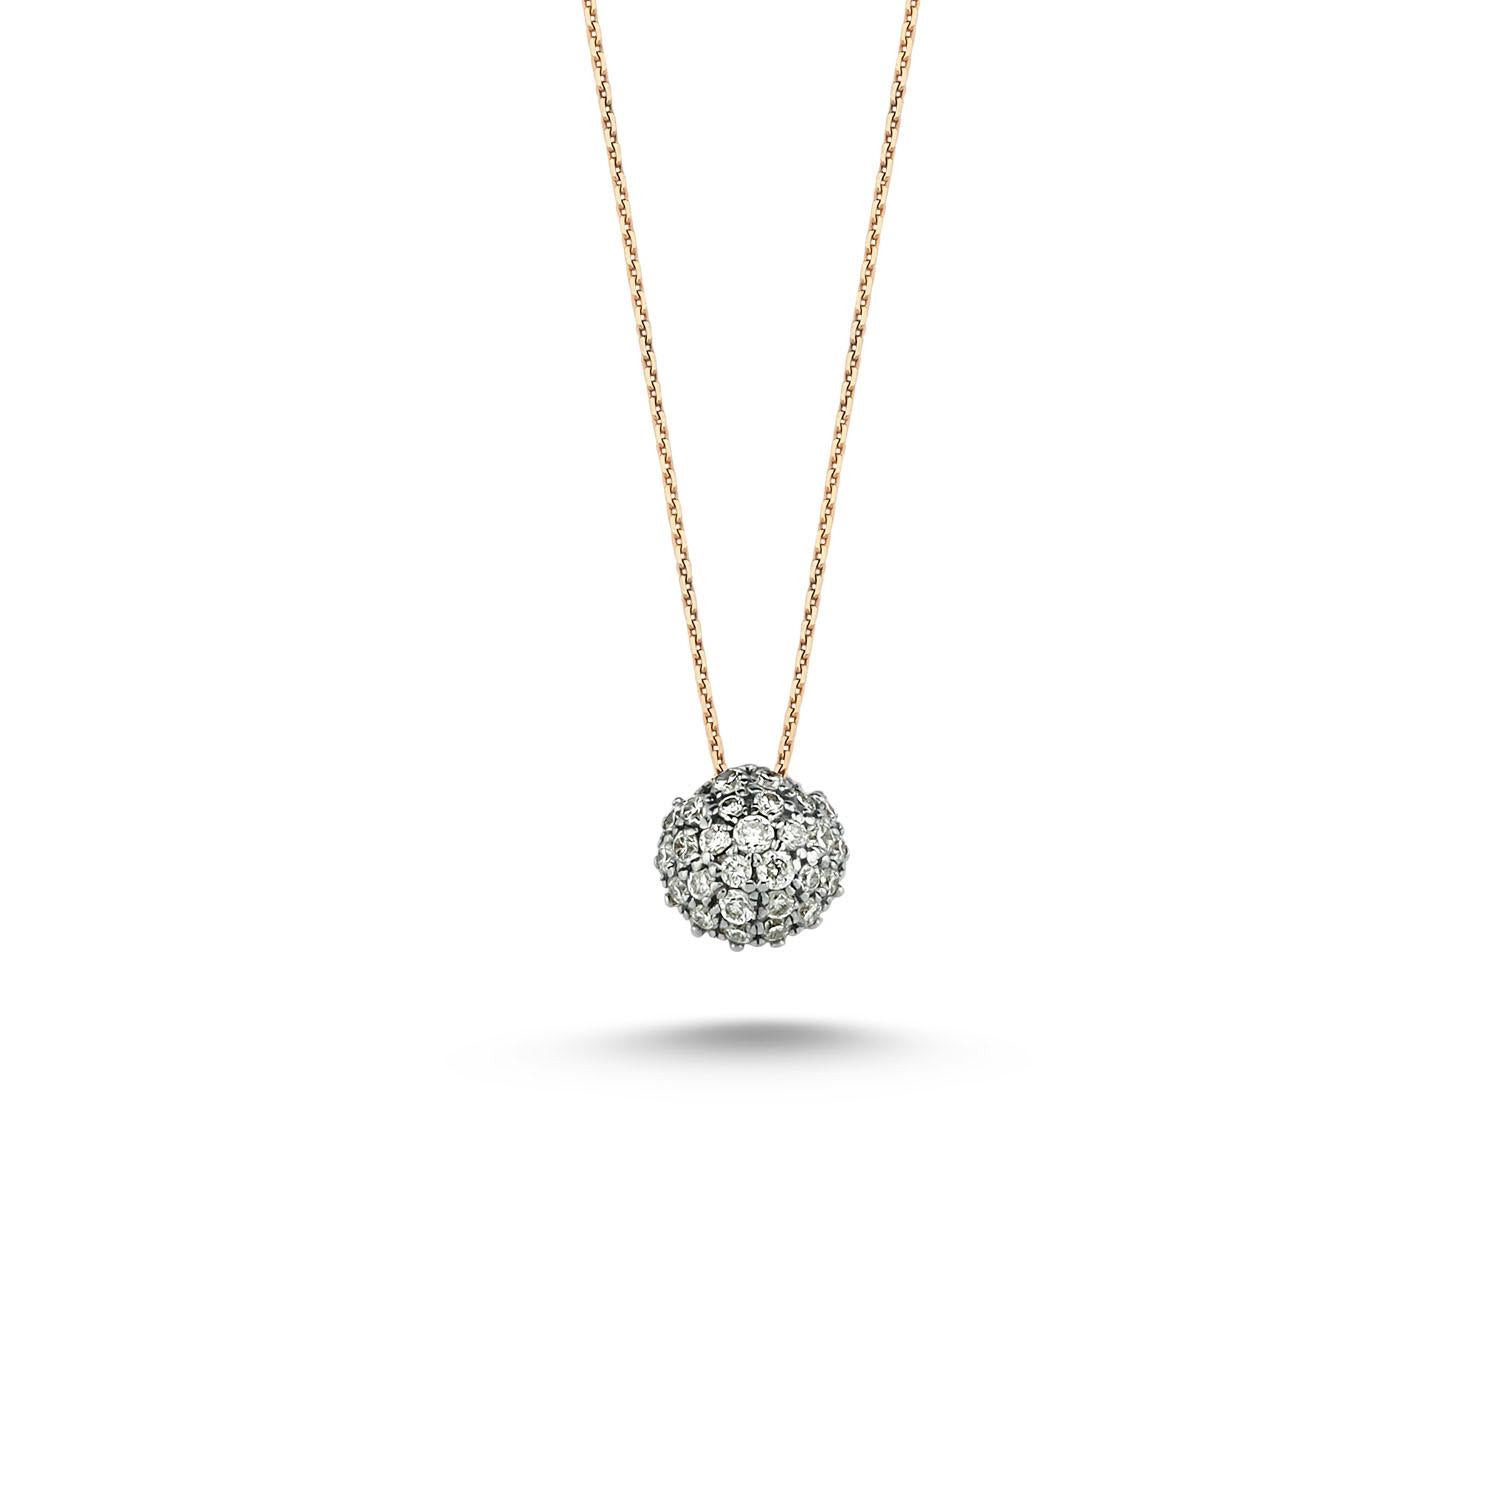 Round white diamond necklace in 14k rose gold by Selda Jewellery

Additional Information:-
Collection: Waves collection
14K Rose gold
0.29ct White diamond
Pendant height 0.6cm
Chain length  42cm